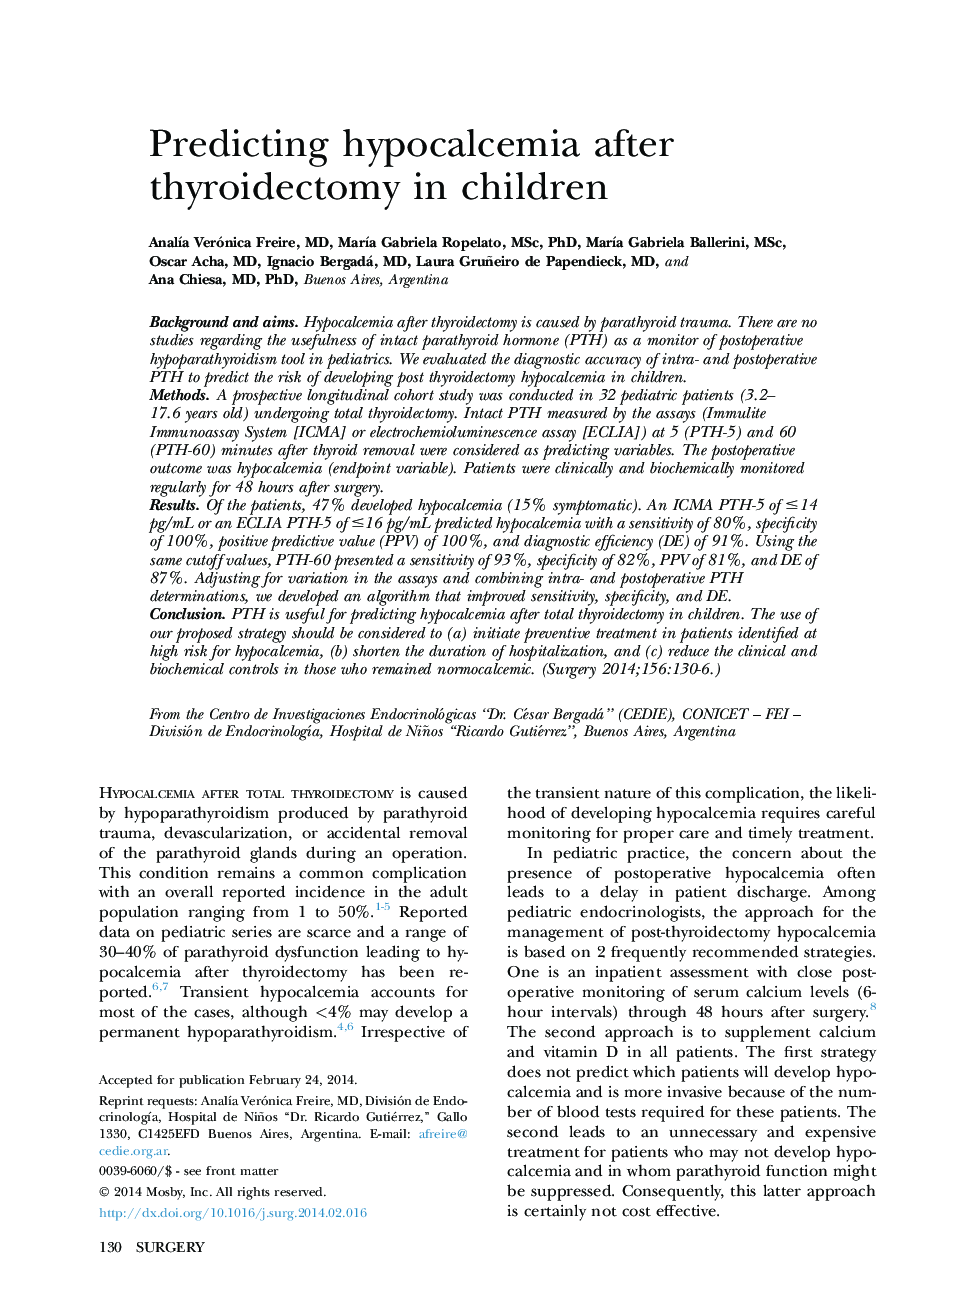 Predicting hypocalcemia after thyroidectomy in children